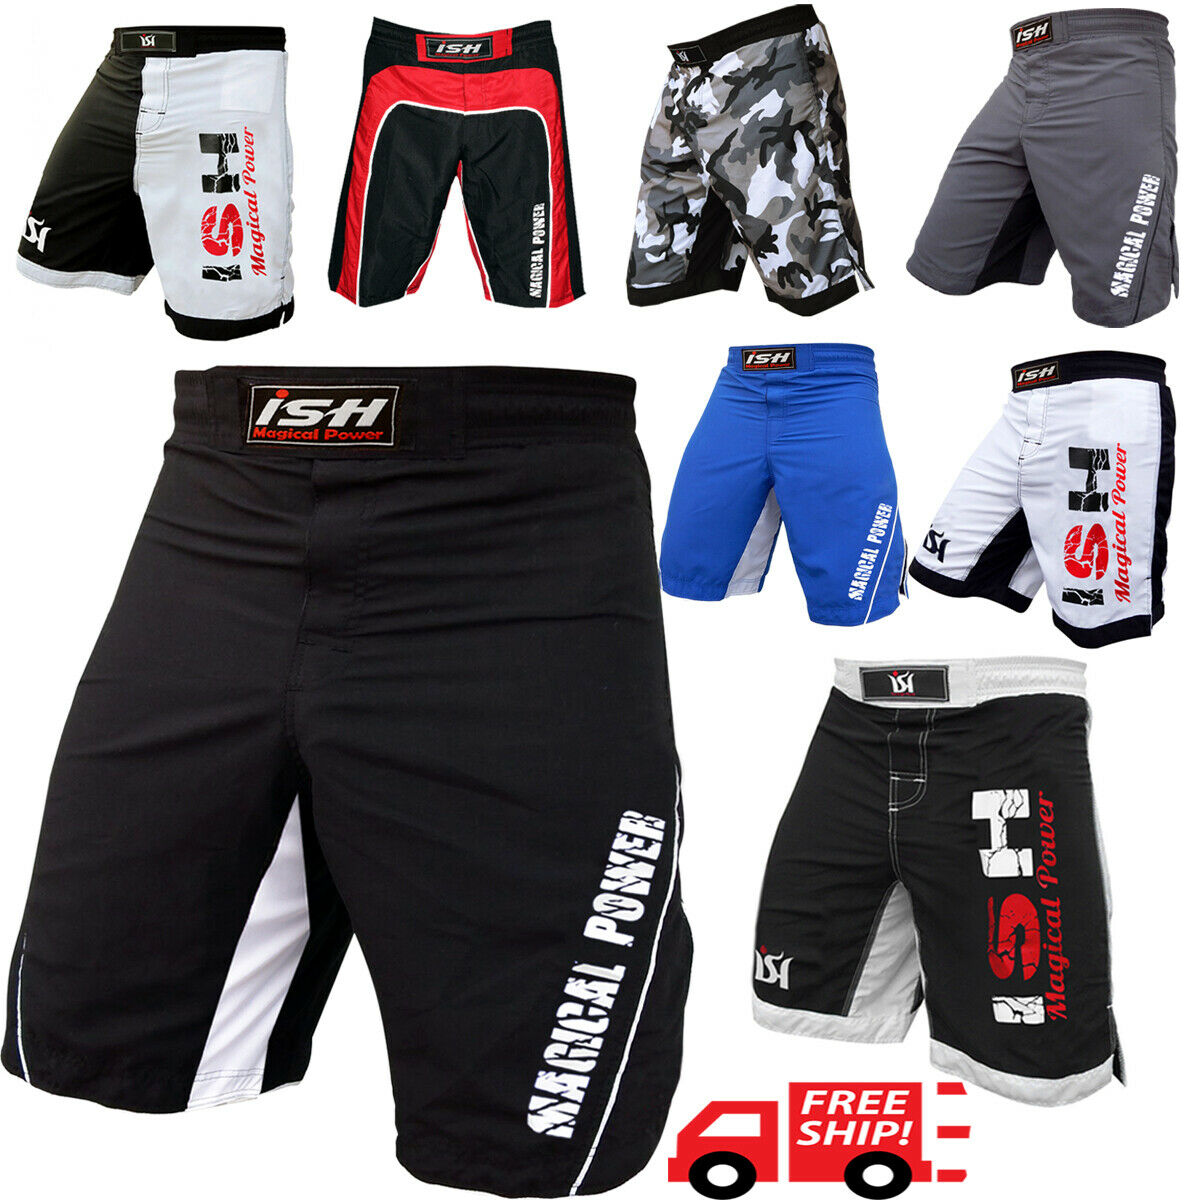 Kick Boxing Mma Shorts Ufc Cage Fight Fighter Grappling Muay Thai Men's Short